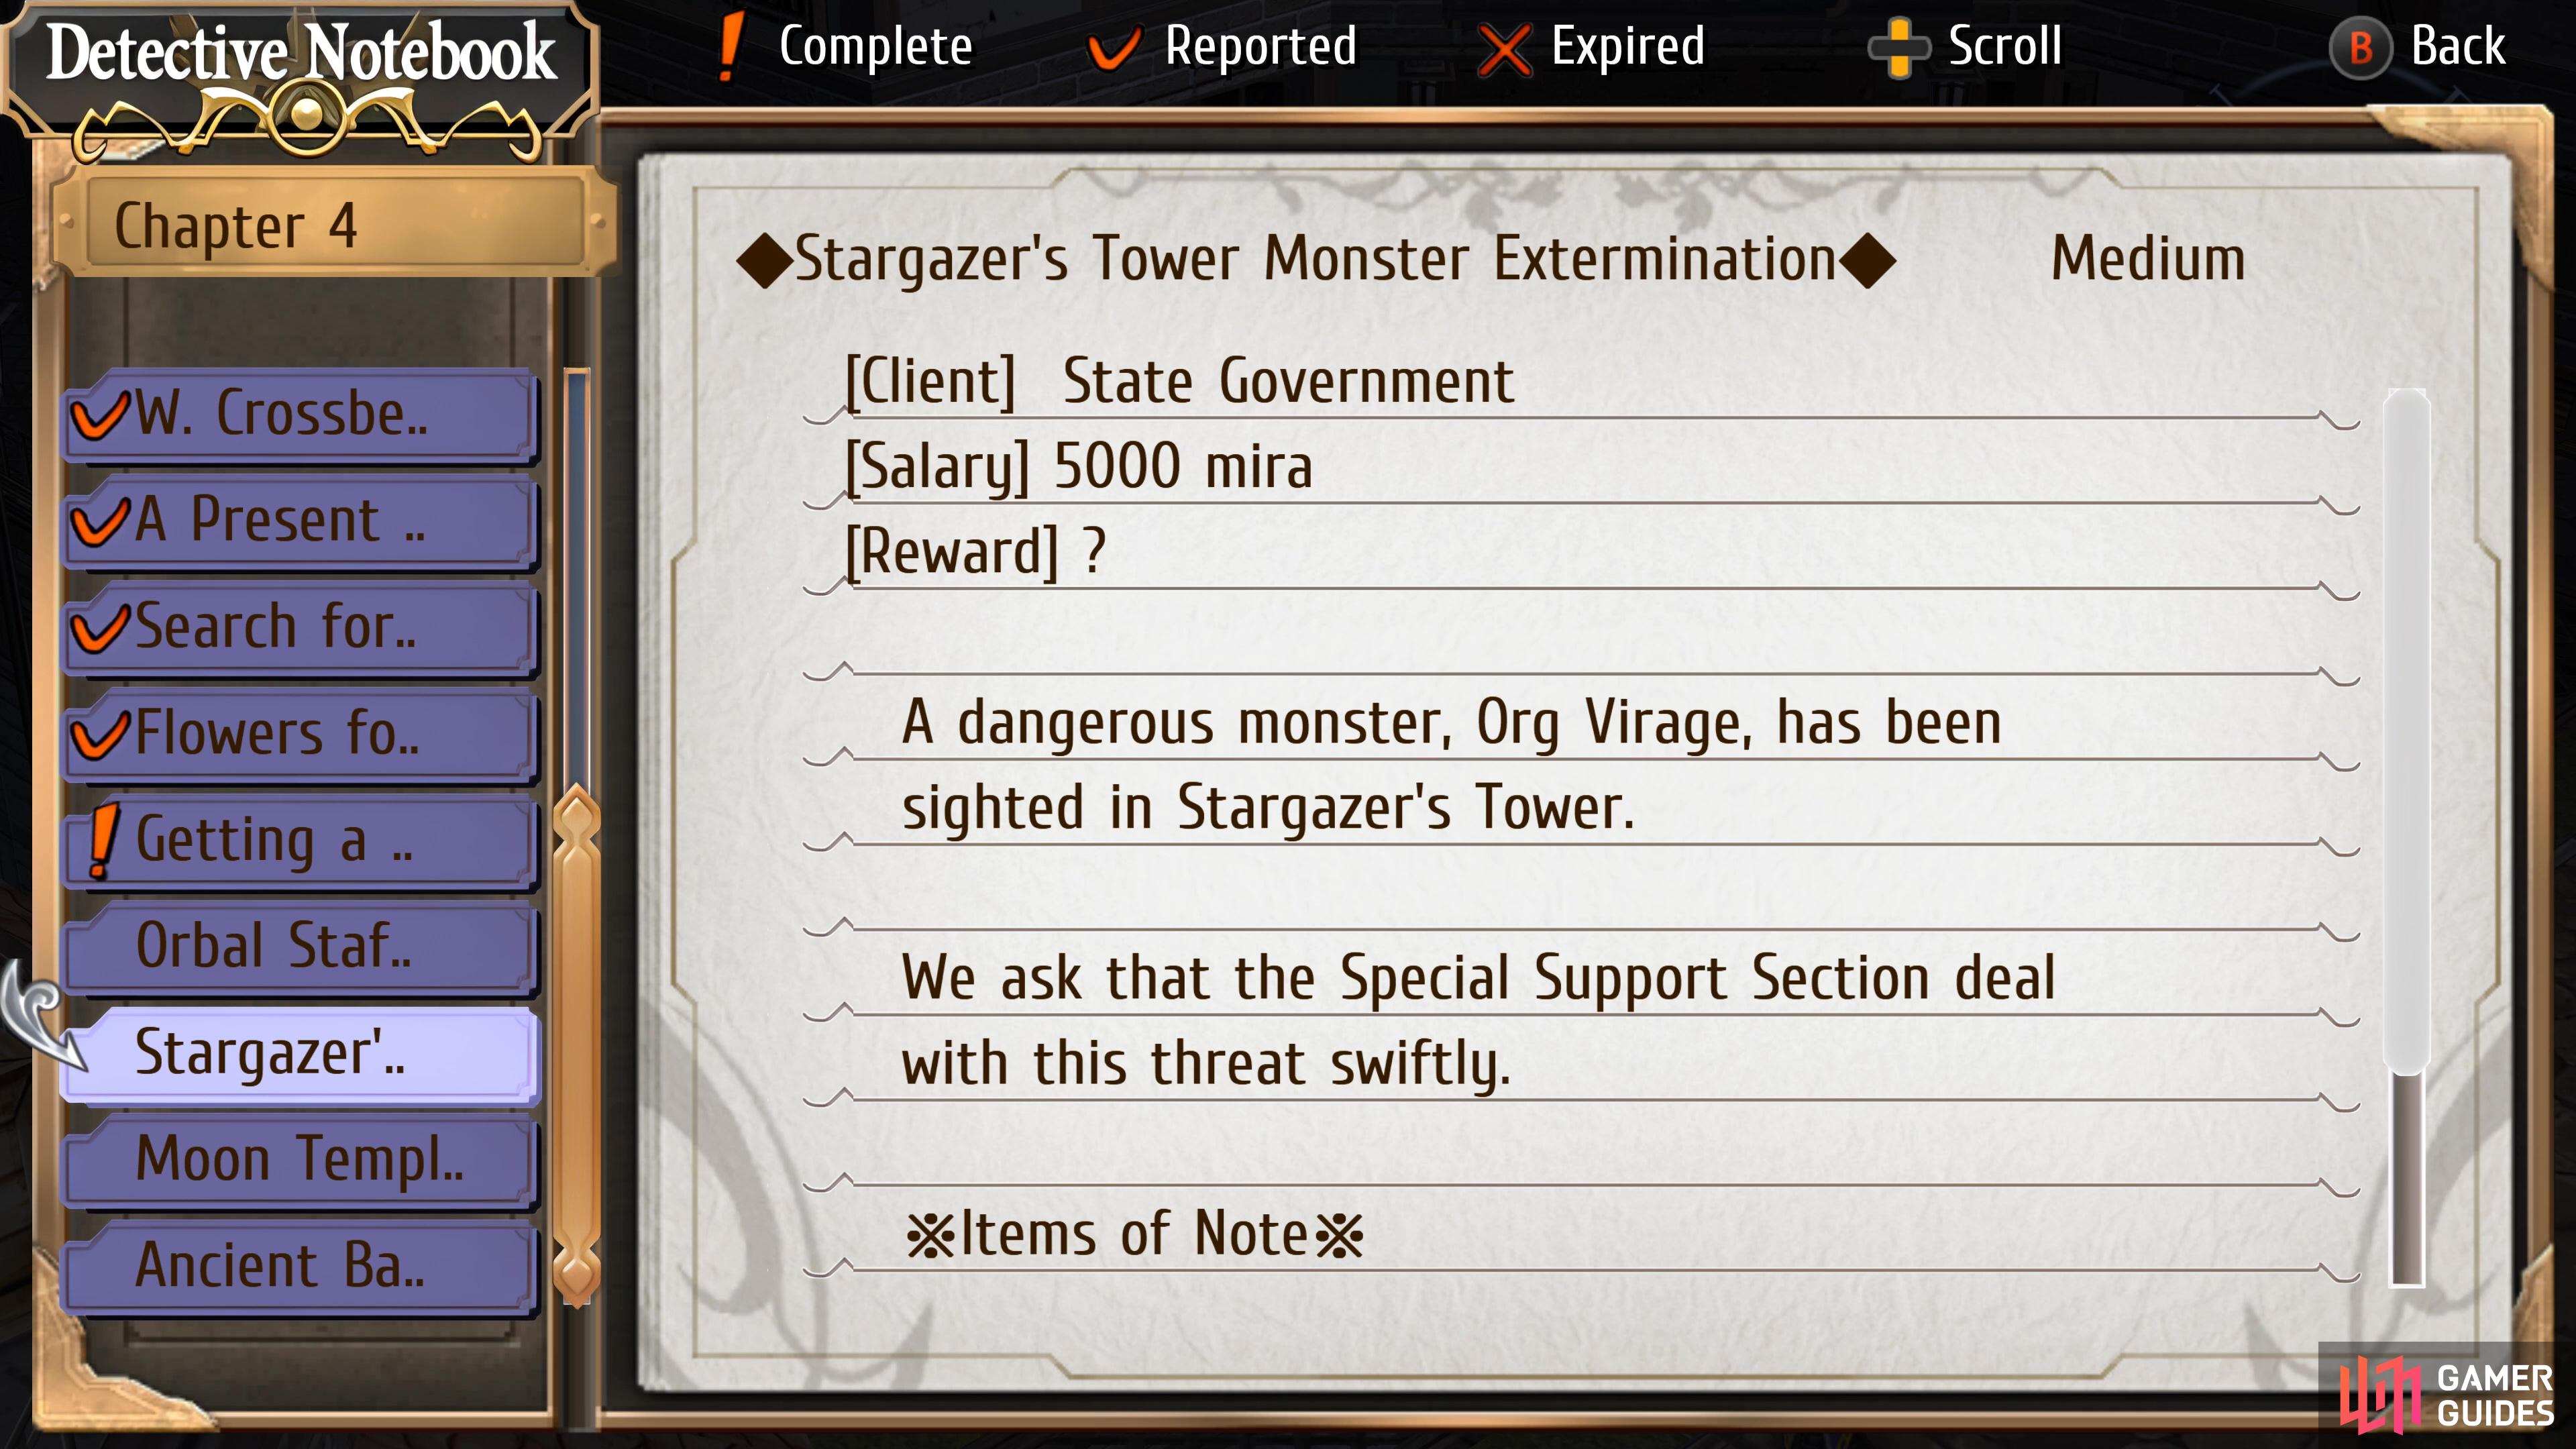 Stargazer’s Tower Monster Extermination is a request on Chapter 4 Day 3.